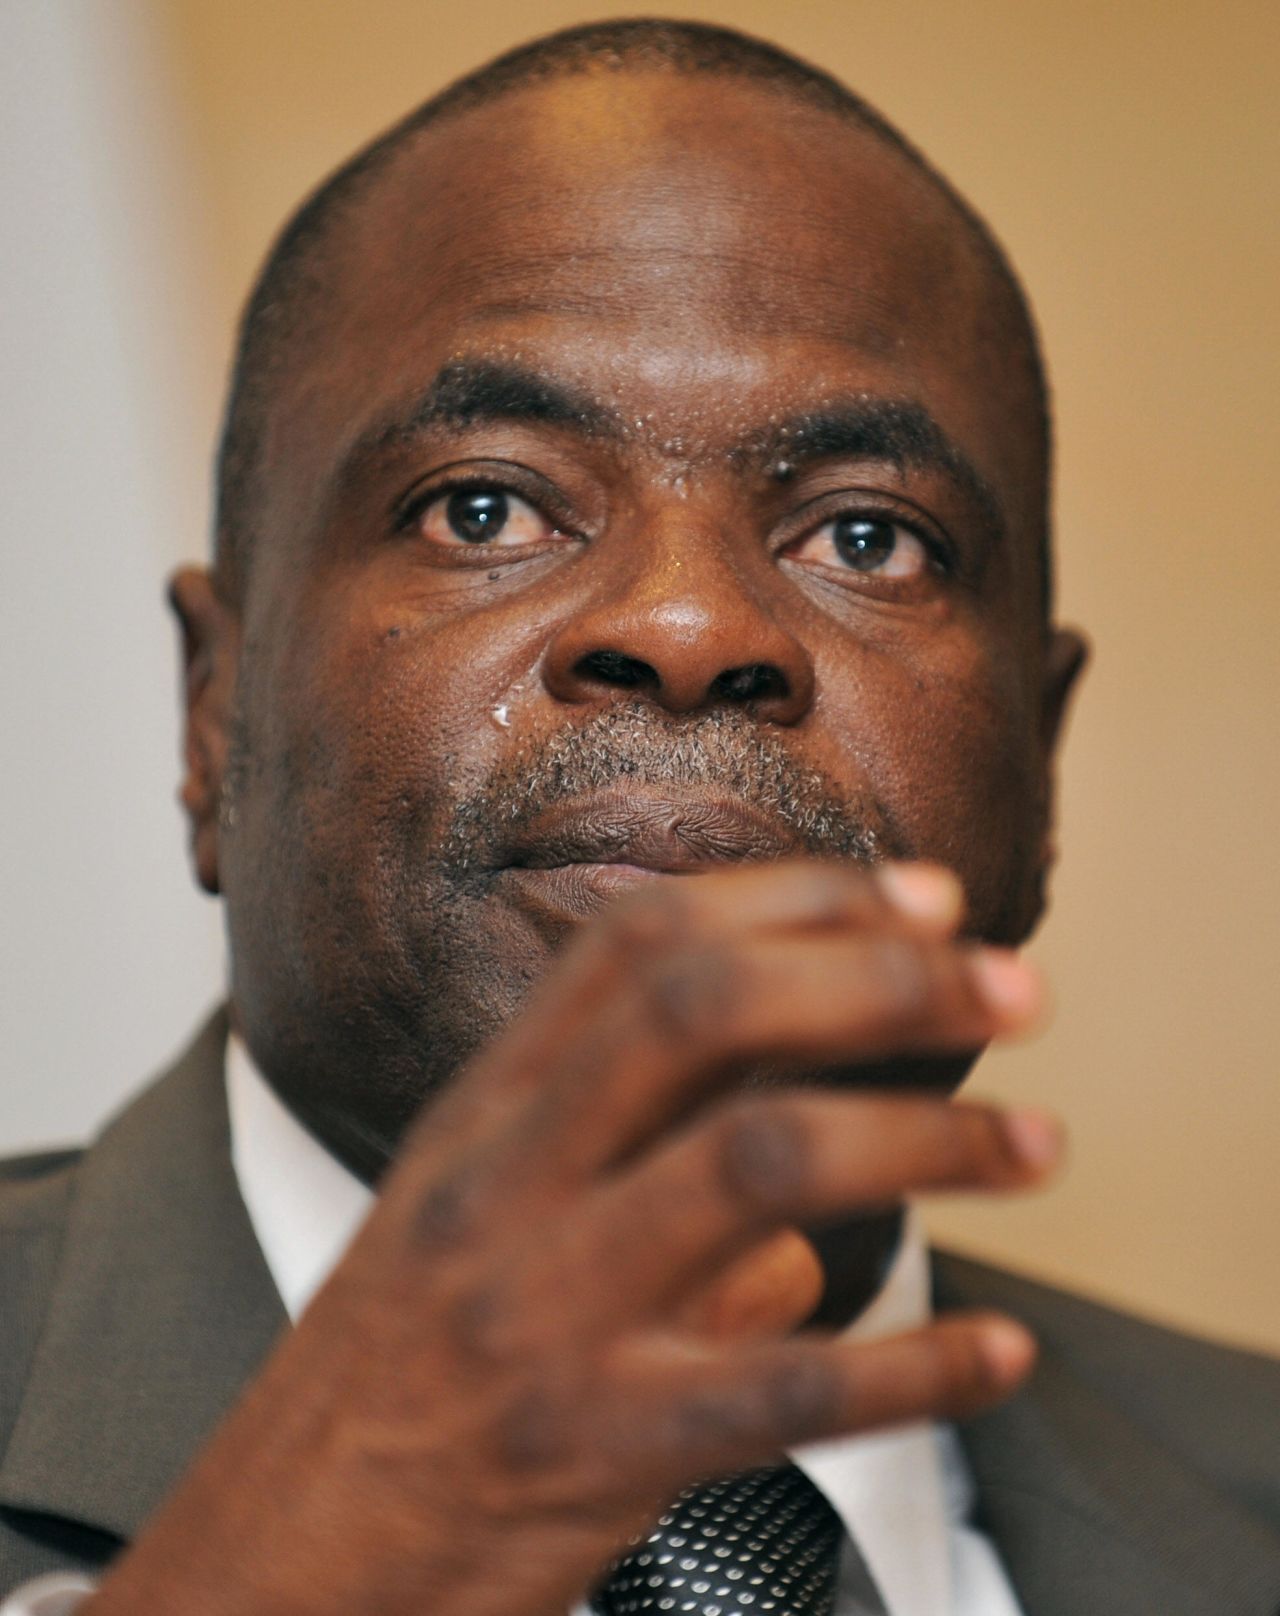 <a href="http://edition.cnn.com/2010/SPORT/football/11/18/soccer.investigation/index.html">FIFA's Ethics Committee confirms the suspension of six FIFA officials including executive committee members Amos Adamu</a> (pictured) and Reynald Temarii, after claims by Britain's Sunday Times newspaper that they offered to sell their World Cup votes. Adamu receives a three-year ban and $11,947 fine and Temarii a 12-month ban and a $5,973 fine. The committee also rules that there is no evidence to support allegations of collusion between rival bid teams. Both Adamu and Temarii<a href="http://news.bbc.co.uk/sport1/hi/football/africa/9385241.stm" target="_blank" target="_blank"> appeal unsuccessfully</a> to FIFA's Appeal Committee and Adamu later also files an <a href="http://www.tas-cas.org/fileadmin/user_upload/press20release20242620_ENG_20final.pdf" target="_blank" target="_blank">unsuccessful appeal to the Court of Arbitration for Sport (CAS). </a> In May 2015, <a href="http://www.fifa.com/governance/news/y=2015/m=5/news=reynald-temarii-general-director-of-the-tahiti-football-association-ba-2604566.html" target="_blank" target="_blank">FIFA bans Temarii for another eight years</a> for allegedly accepting money from former Asian Football Confederation president Mohamed Bin Hammam to cover legal costs of his appeal of FIFA's 2010 ban.